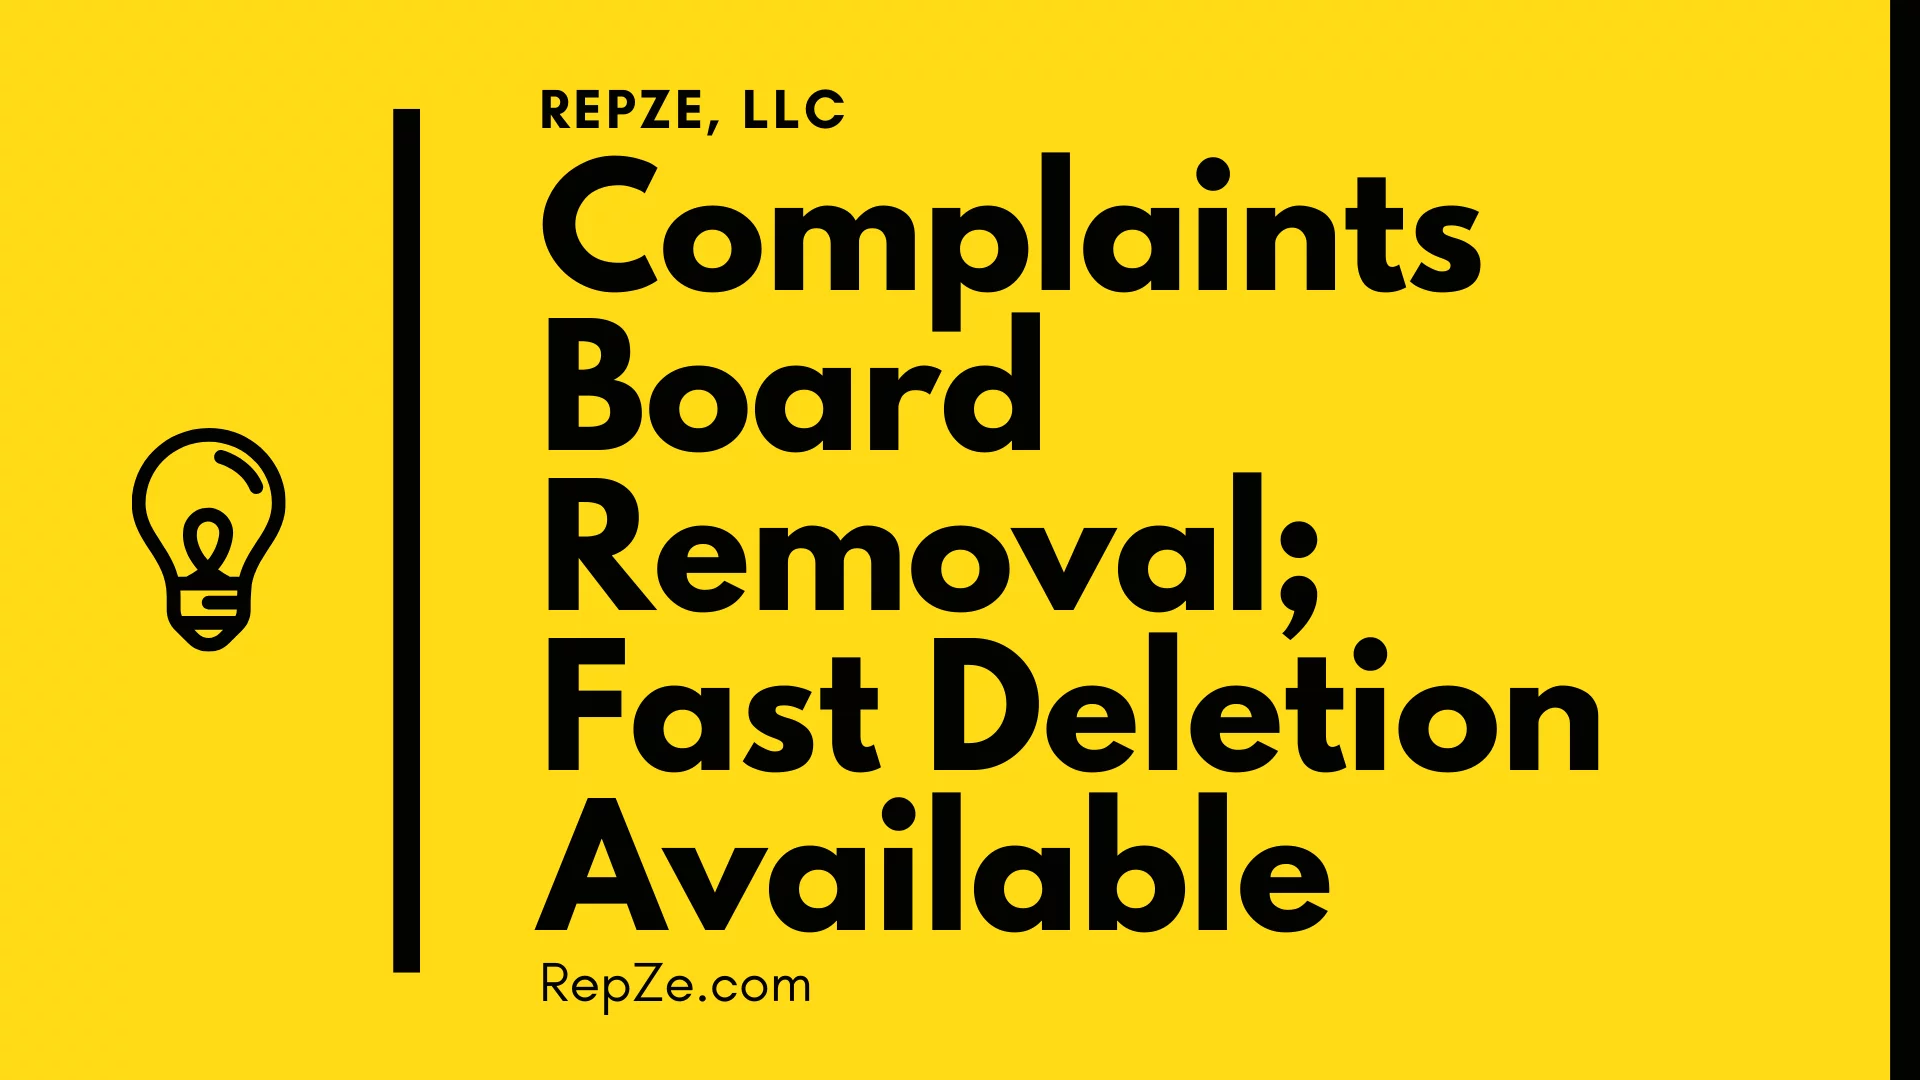 Complaints Board Removal; Fast Deletion Available